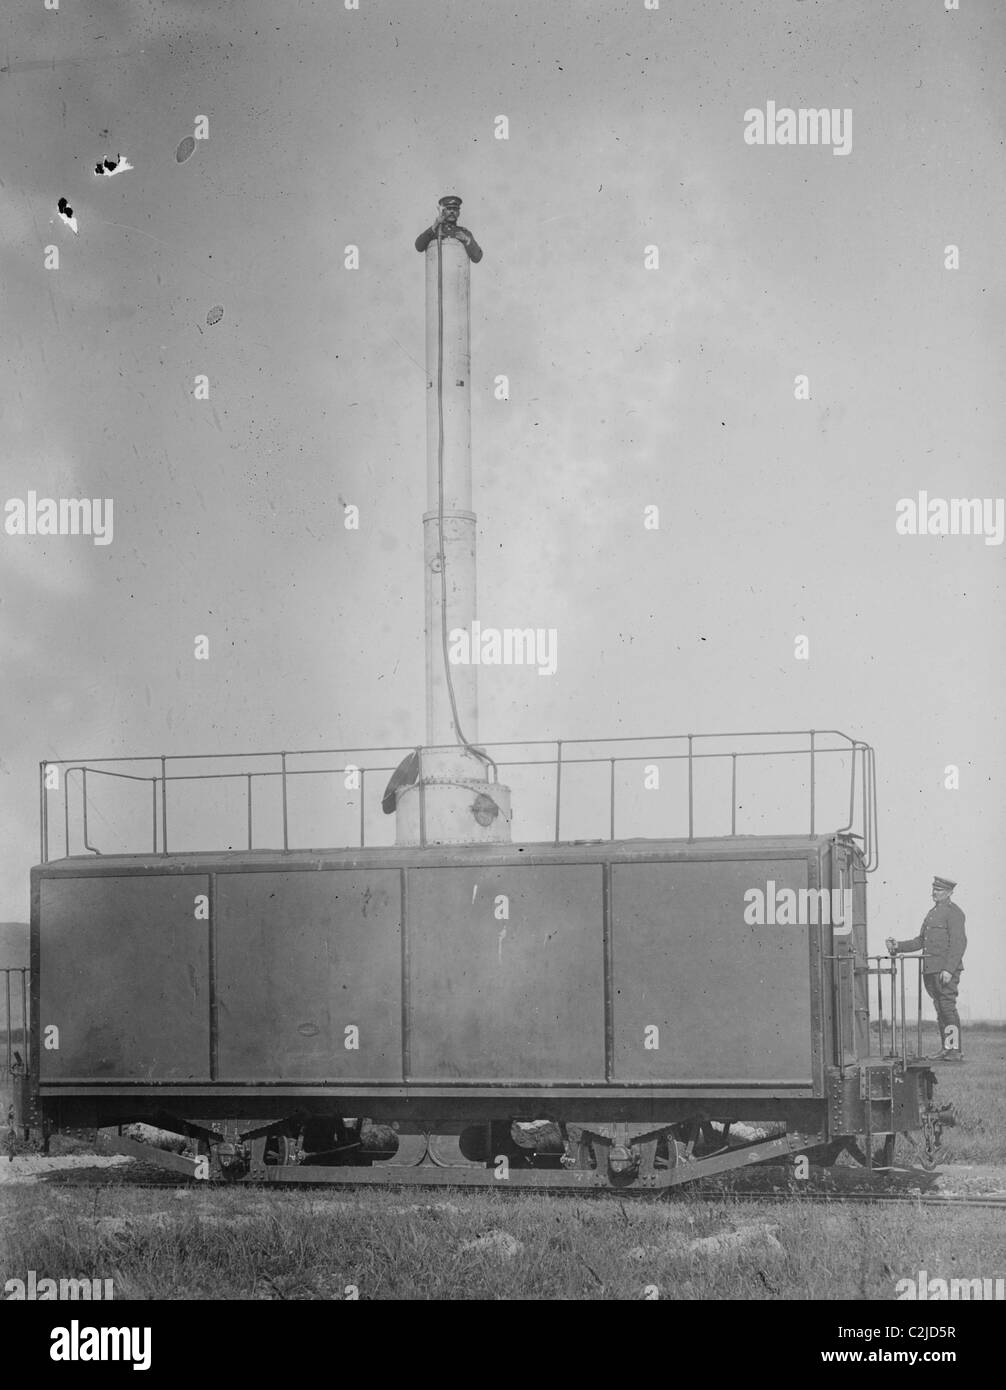 A Train Carries a man 10 stories aloft on what looks like a Chimney Stock Photo